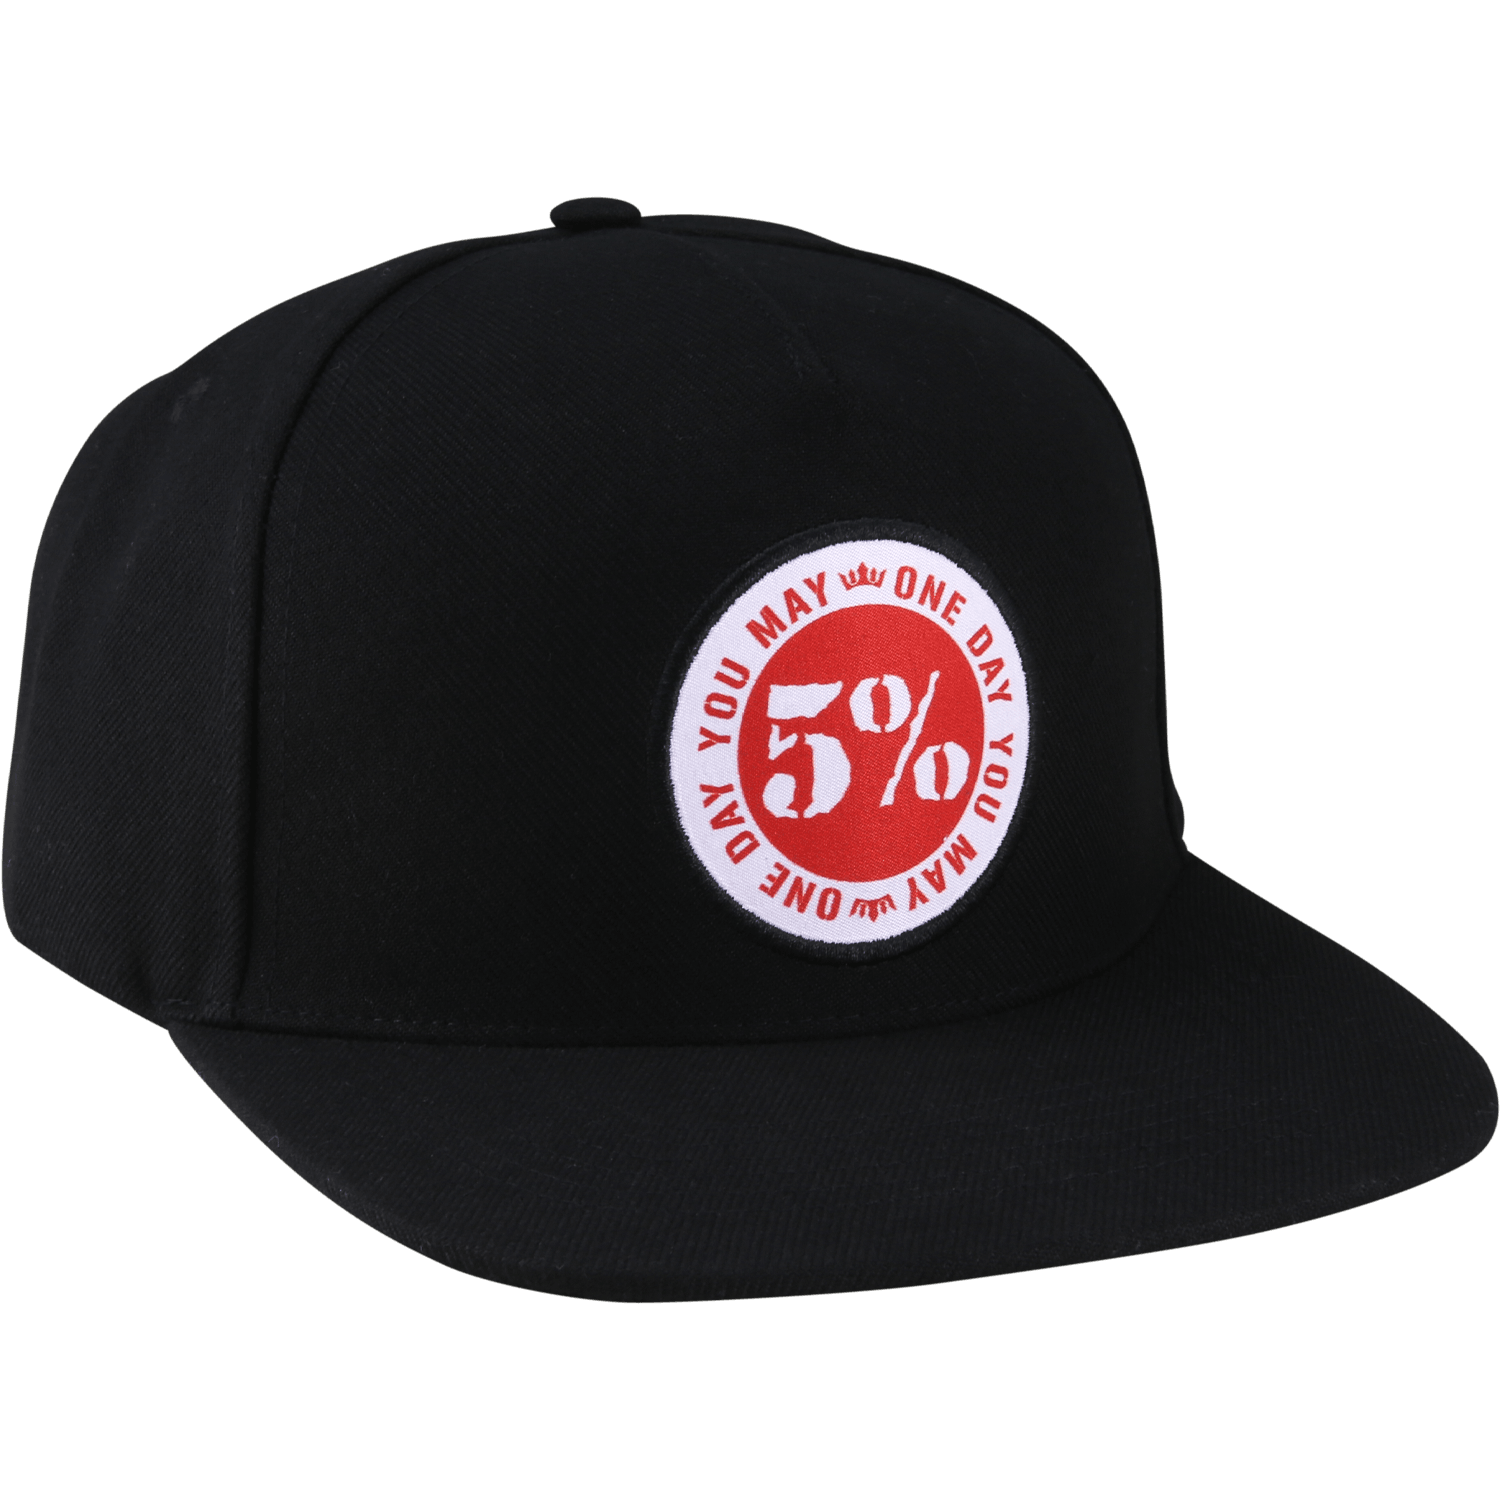 One Day You May, Black Hat with Patch - 5% Nutrition